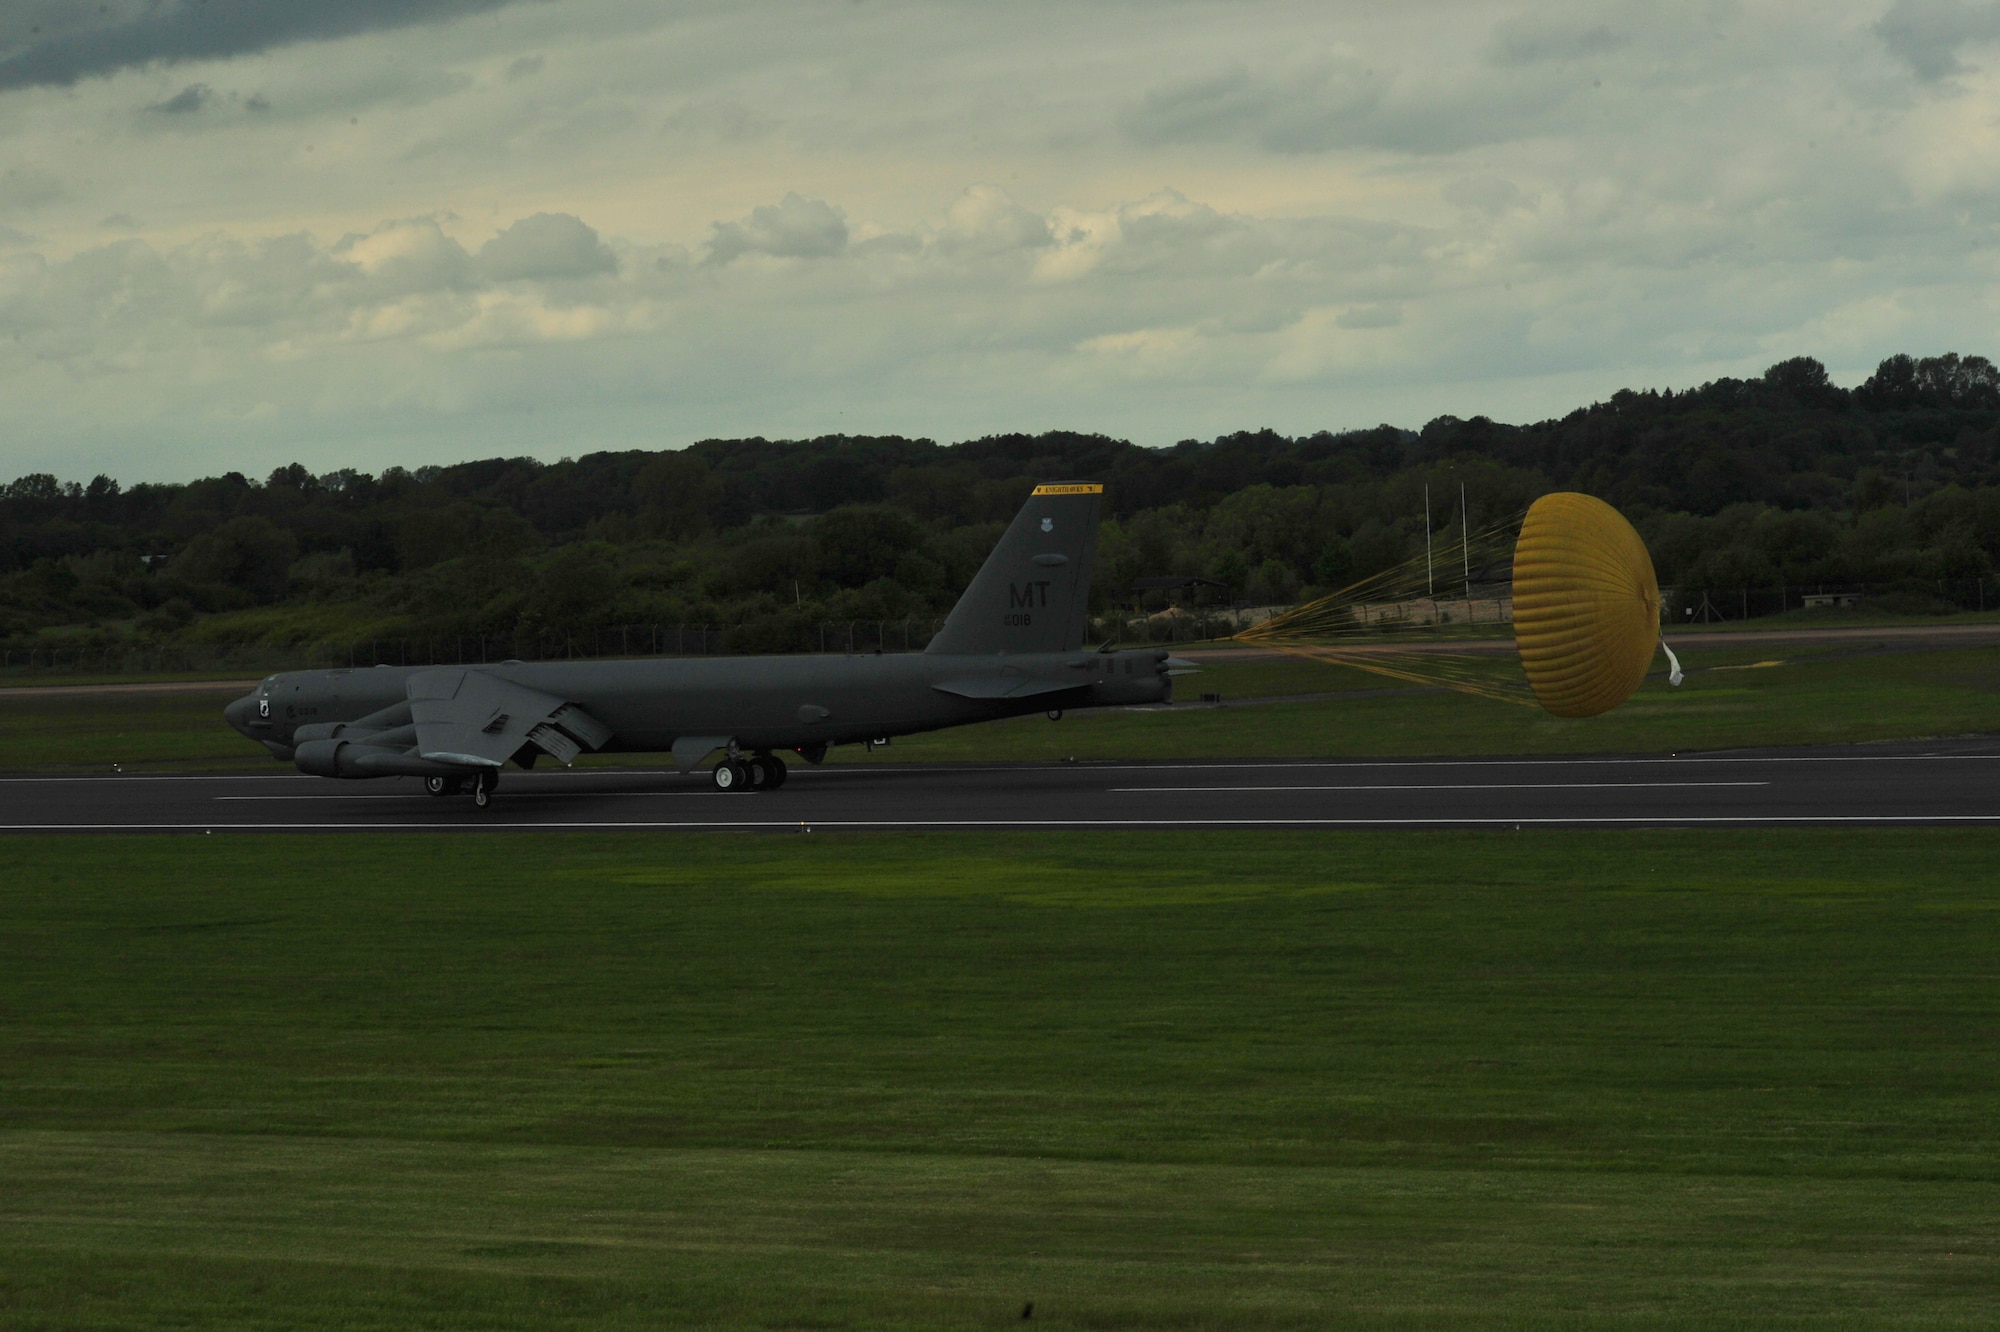 A B-52 Stratofortress assigned to the 5th Bomb Wing at Minot Air Force Base, N.D., arrives at Royal Air Force Fairford, England, June 5, 2015. During the short-term deployment, three Minot-based B-52 bombers, supported by more than 330 Air Force Global Strike Command Airmen, conducted training flights with ground and naval forces around the region and participated in multinational exercises Baltops 2015 and Saber Strike 2015, over international waters in the Baltic Sea and the territory of the Baltic states and Poland. (U.S. Air Force photo/Senior Airman Malia Jenkins) 